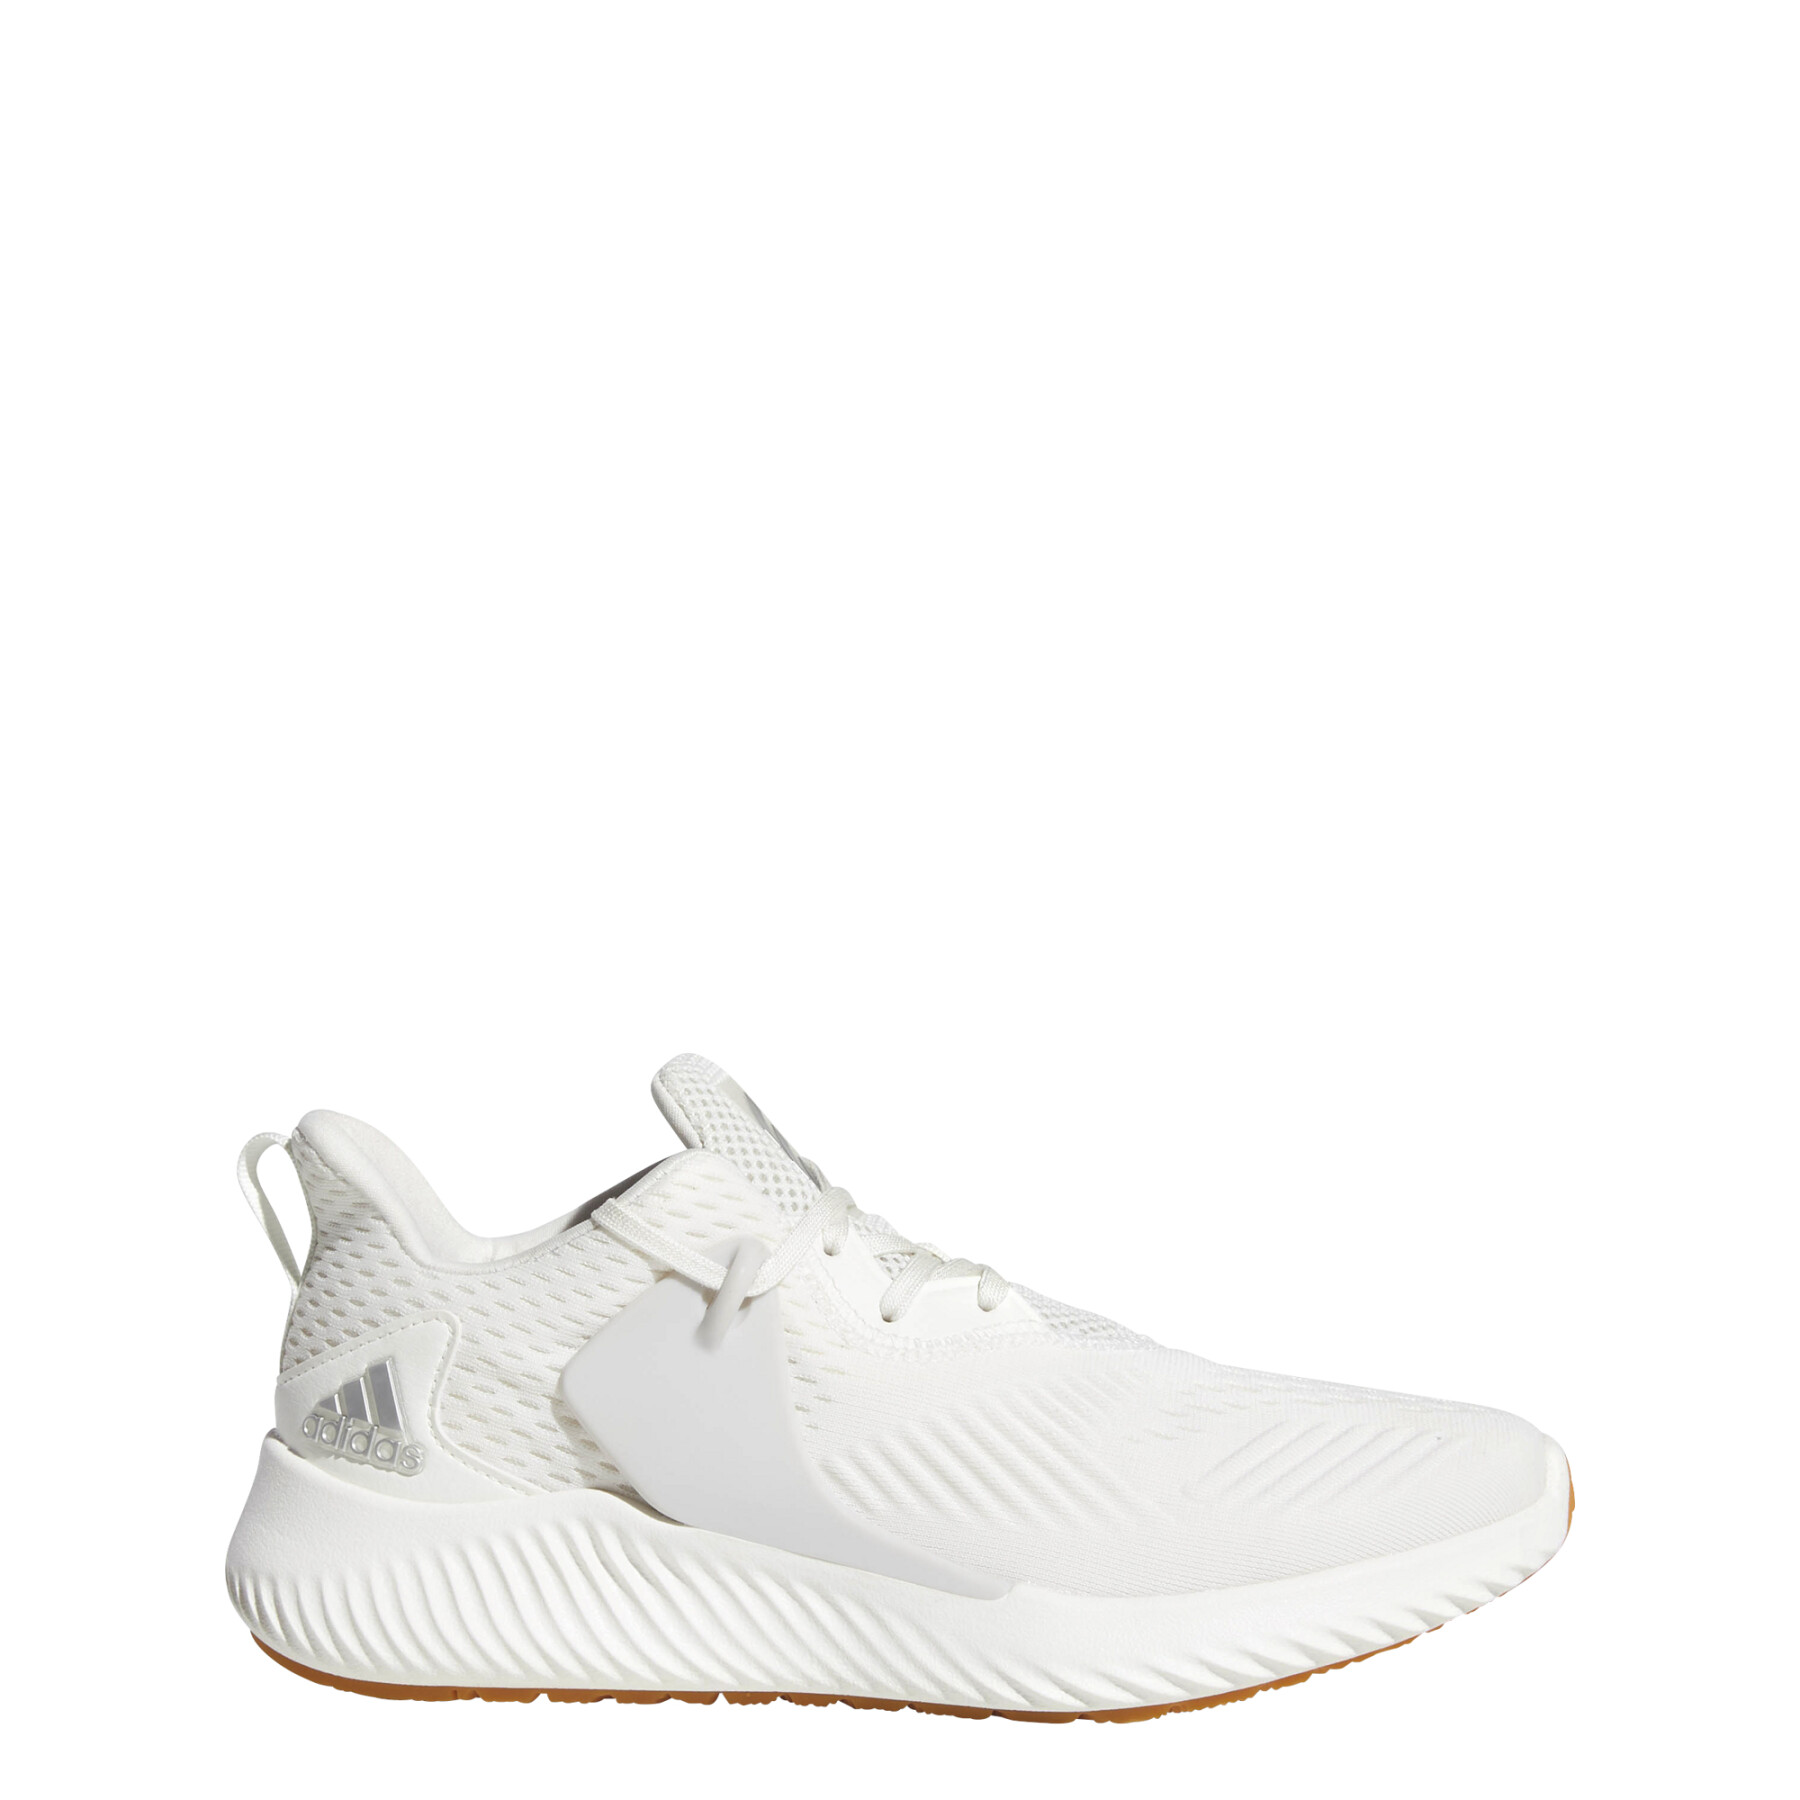 Chaussures femme adidas Alphabounce RC 2.0